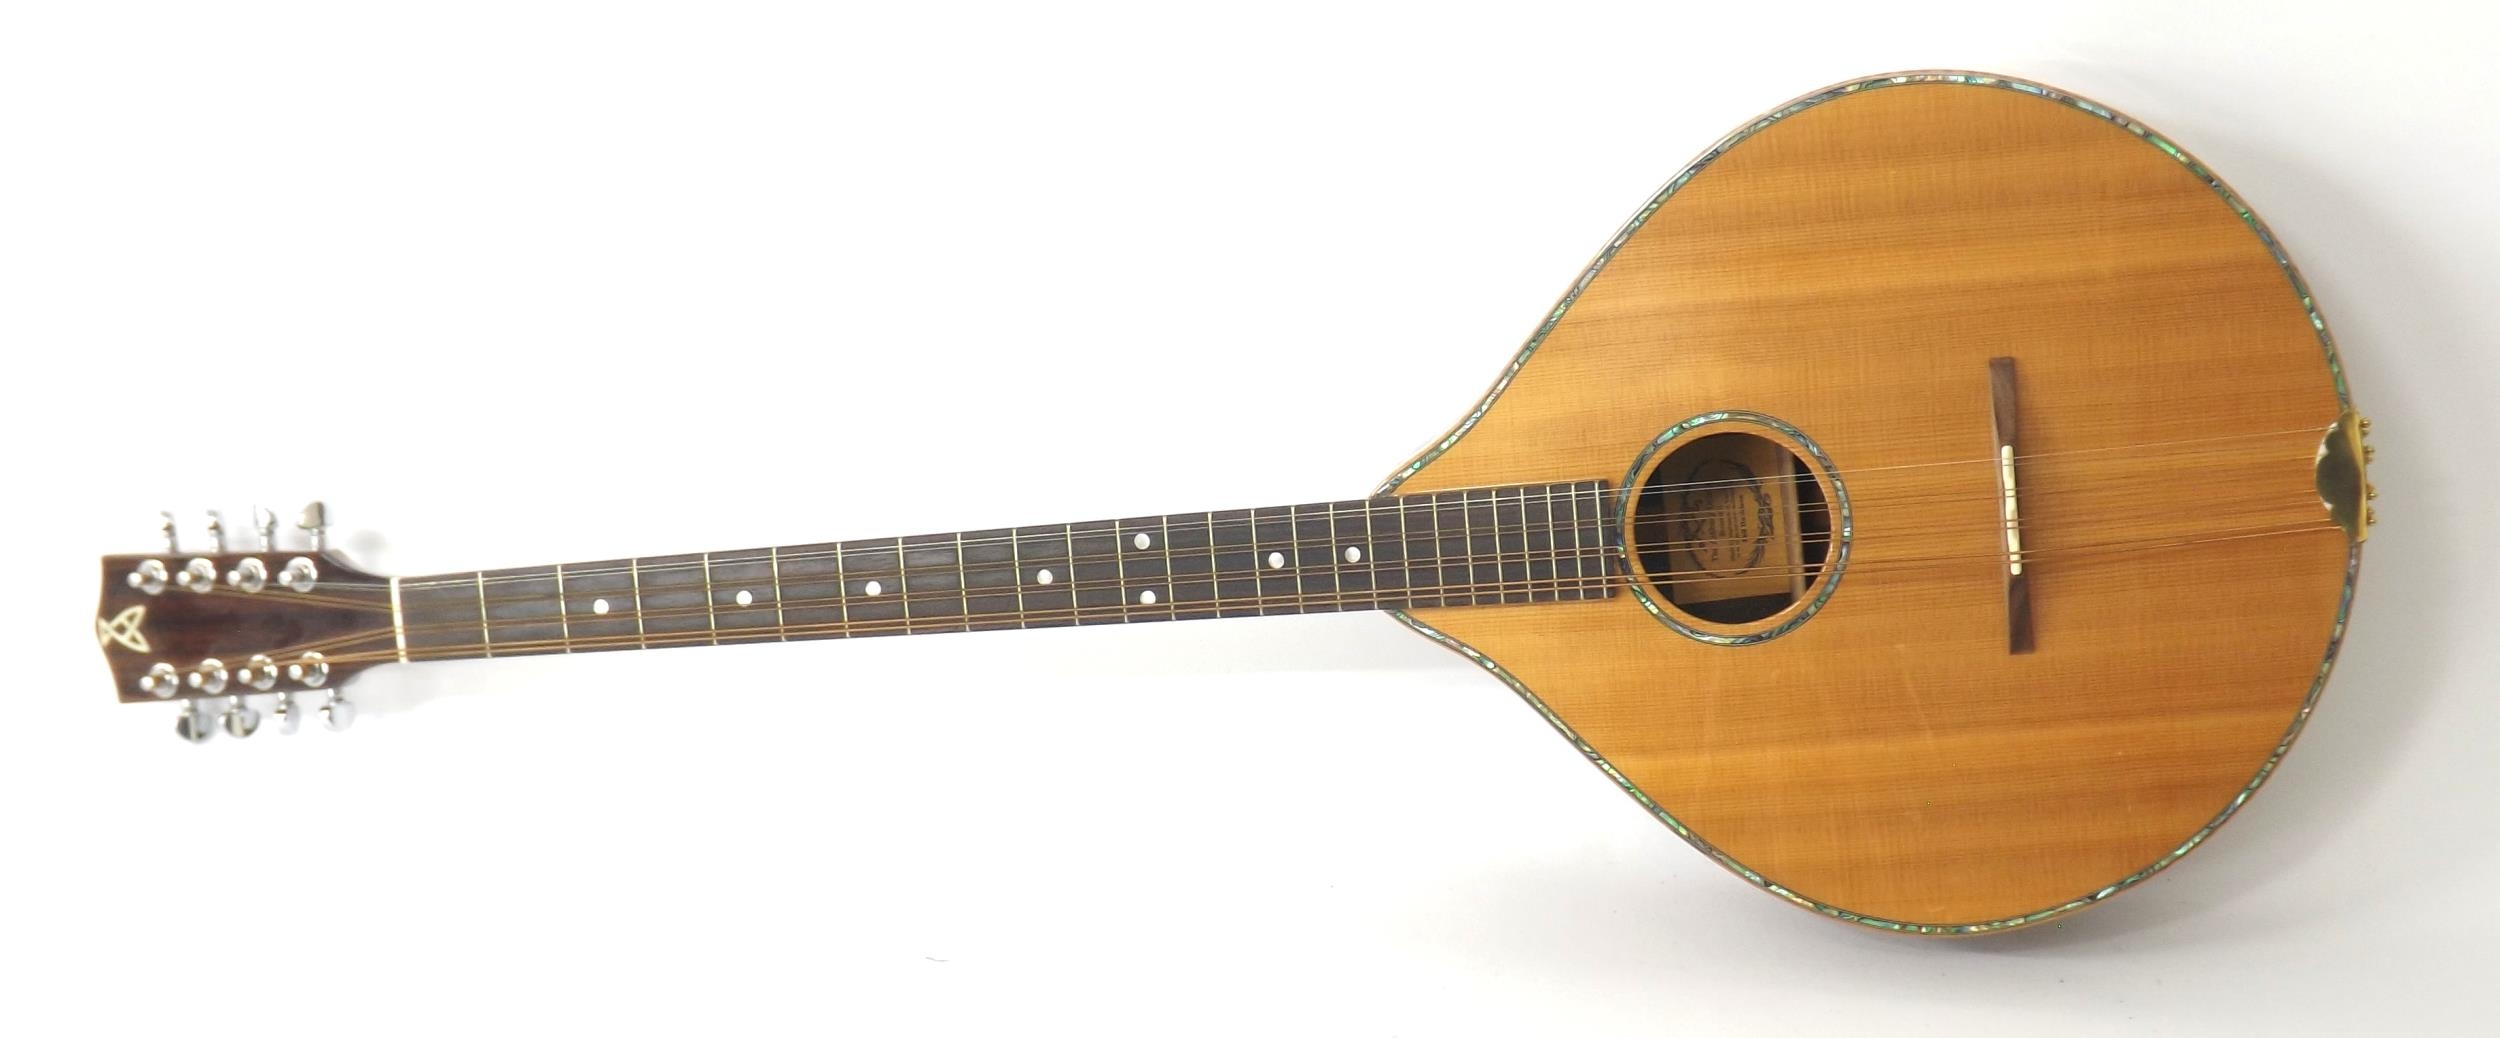 Contemporary bouzouki by and labelled The Ashbury Deluxe, made by craftsmen in Vietnam to the design